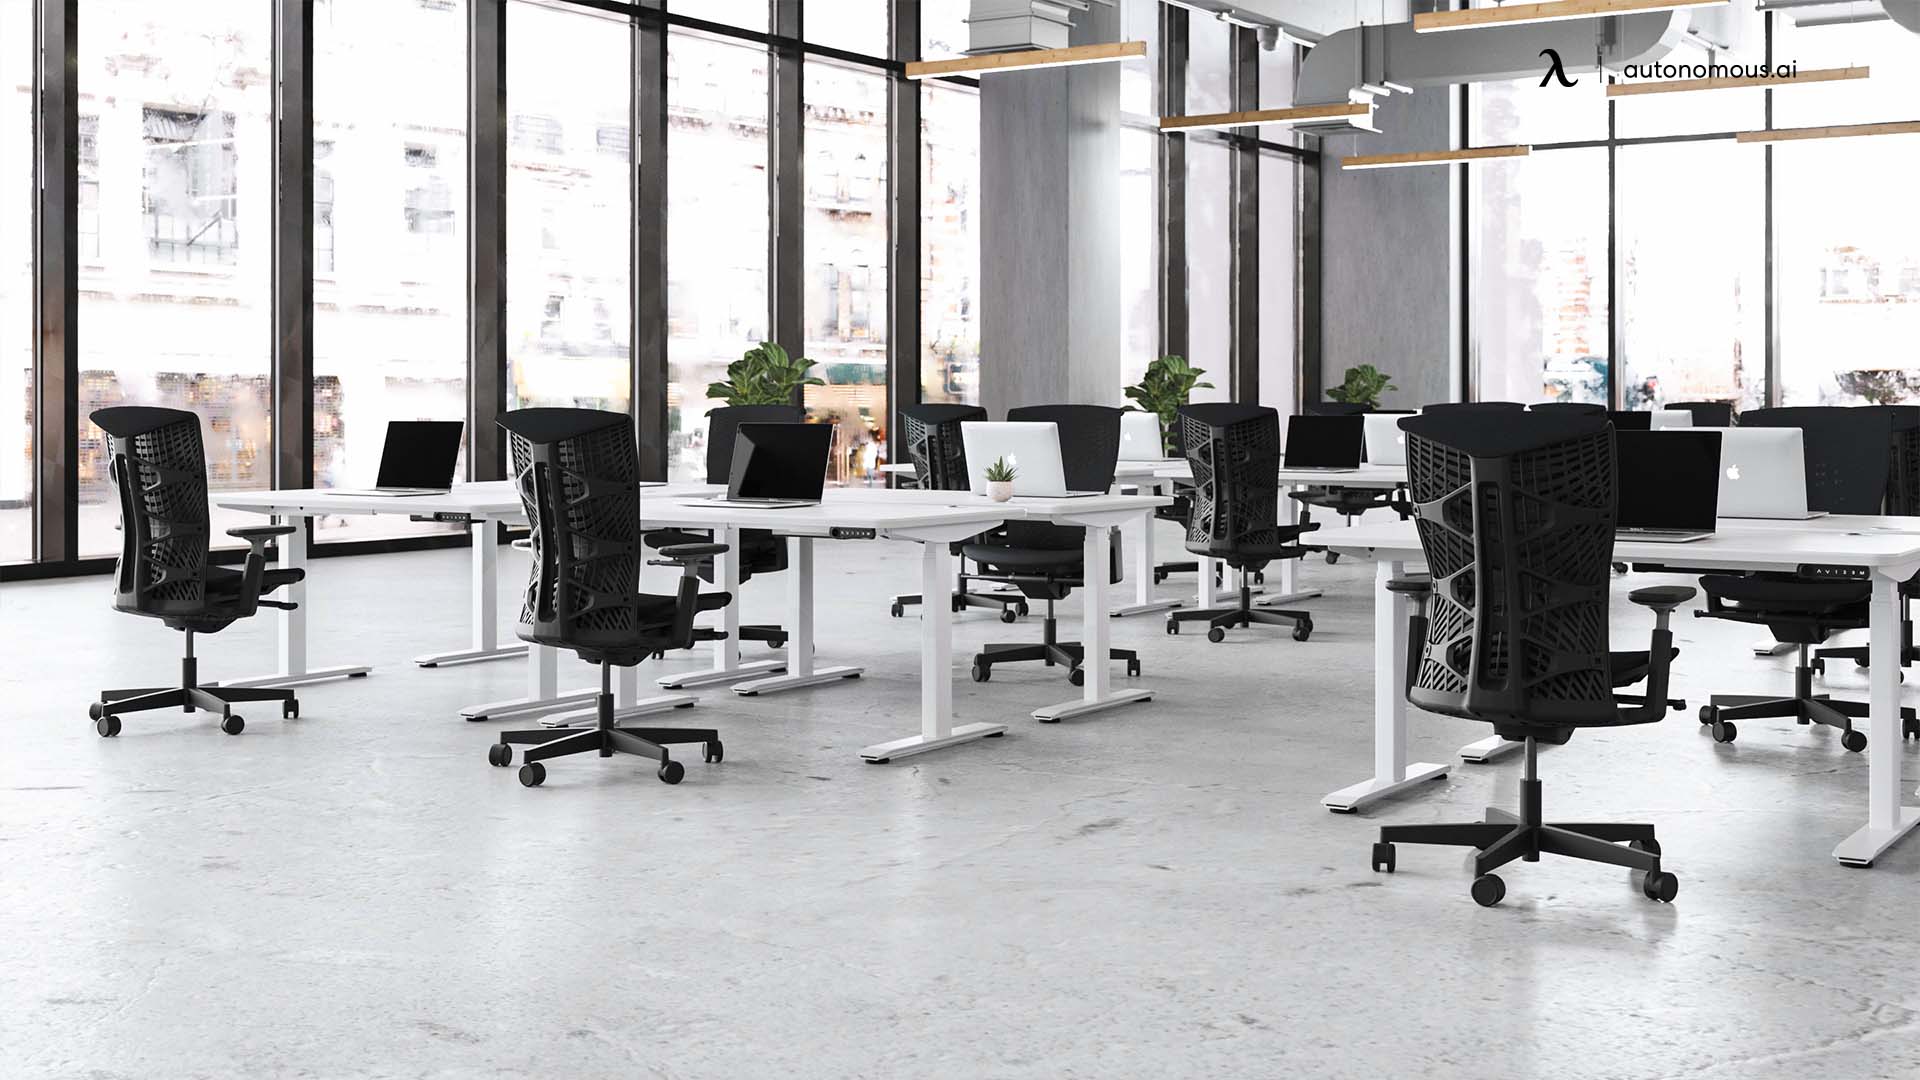 Why Consider Wholesale Furniture for startup office setup